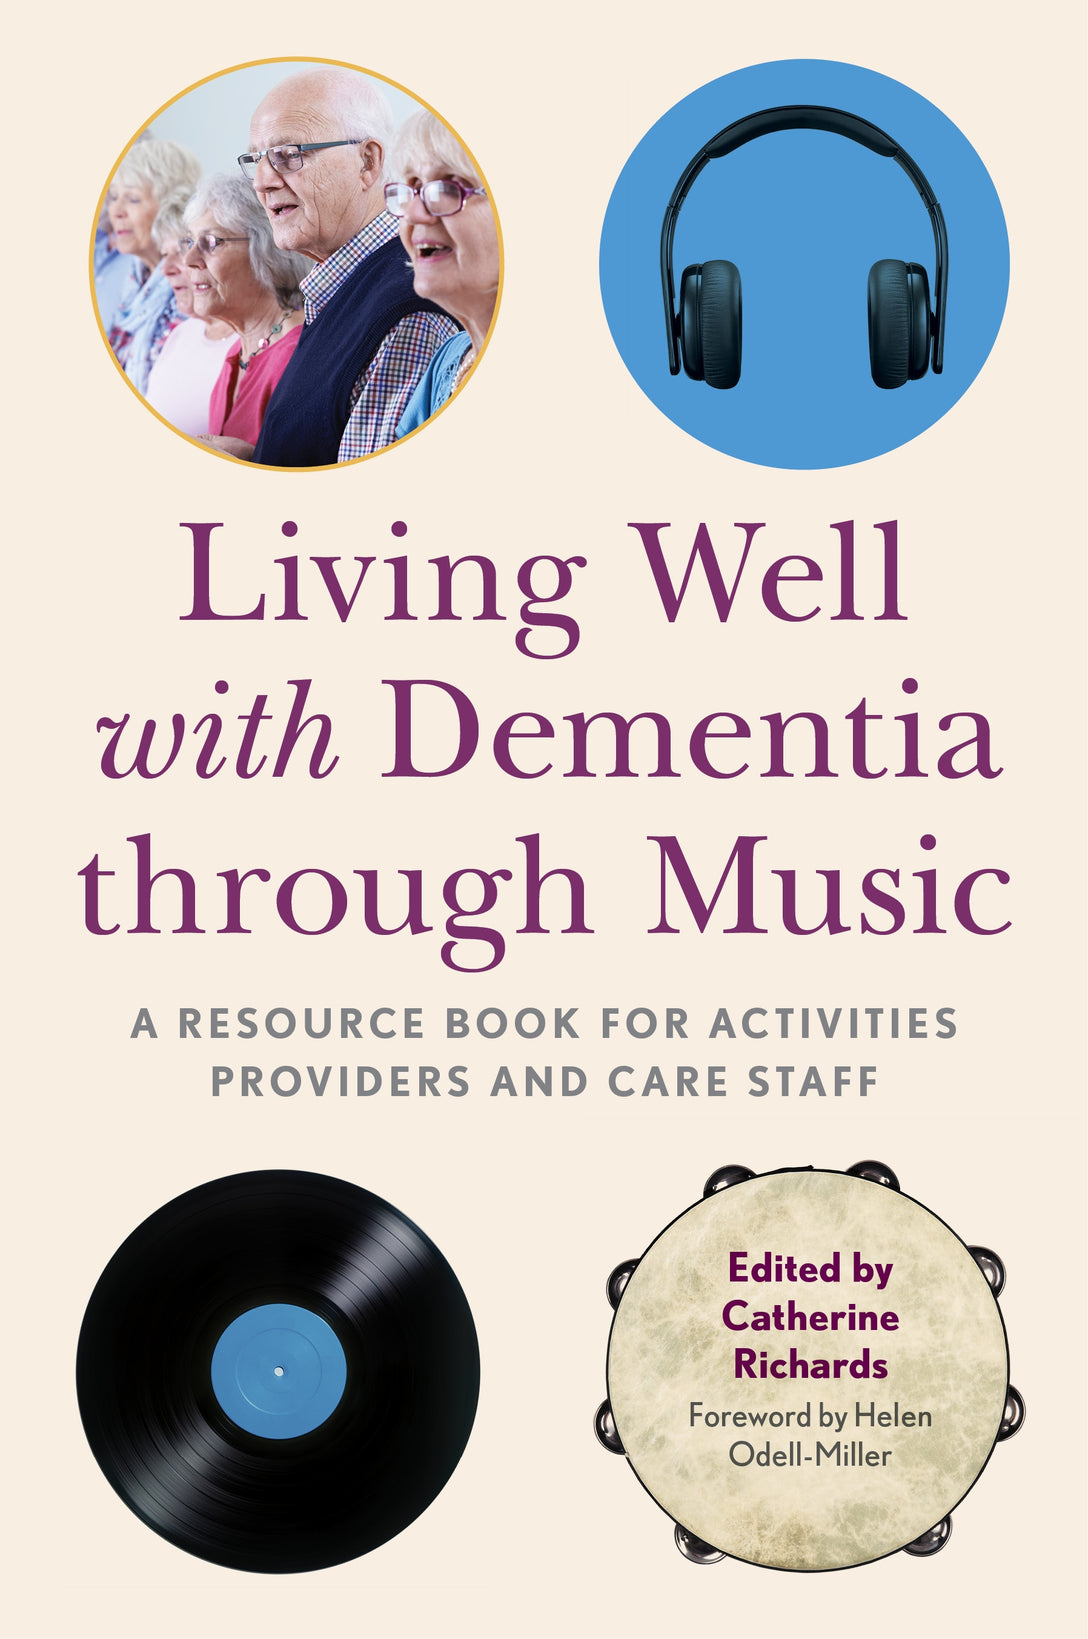 Living Well with Dementia through Music by Catherine Richards, No Author Listed, Helen Odell-Miller